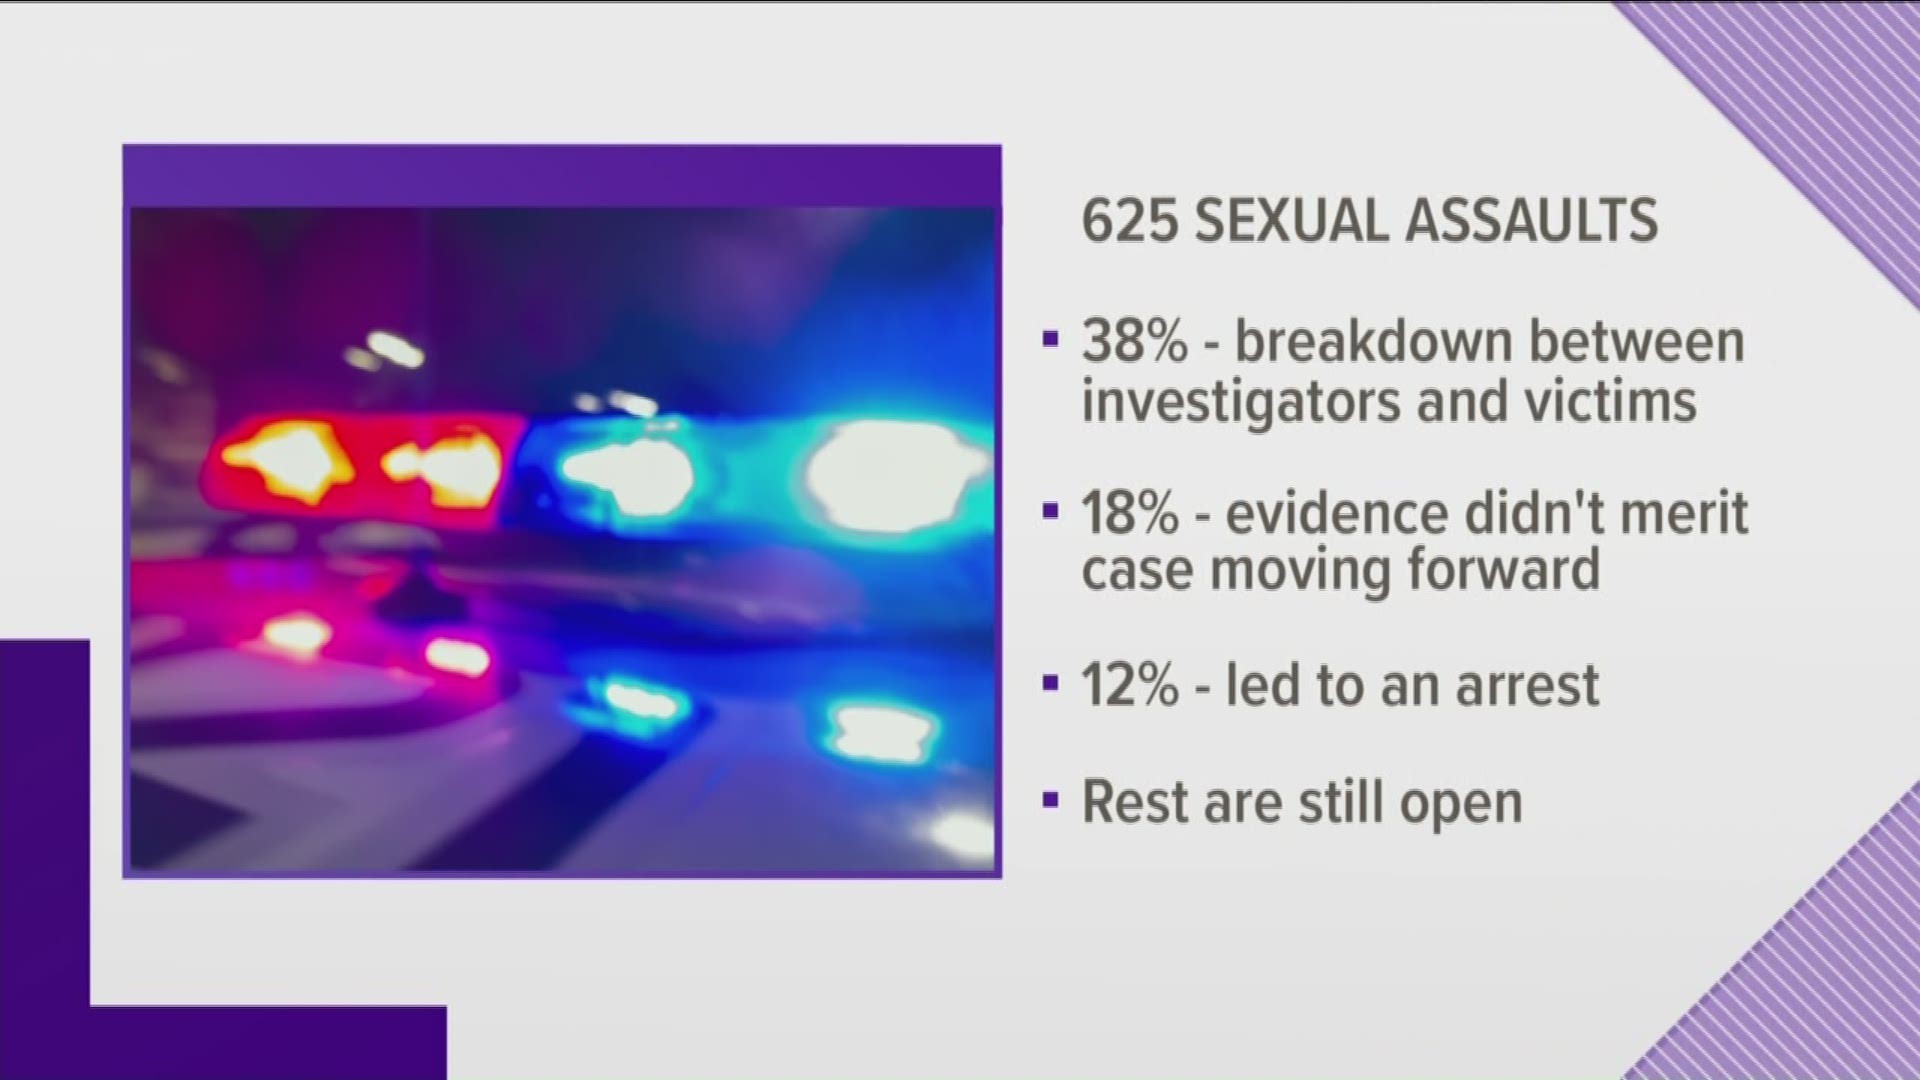 Dozens of Travis County officials met Friday to try to understand the gaps in sexual assault investigations that keep potential predators on the street.